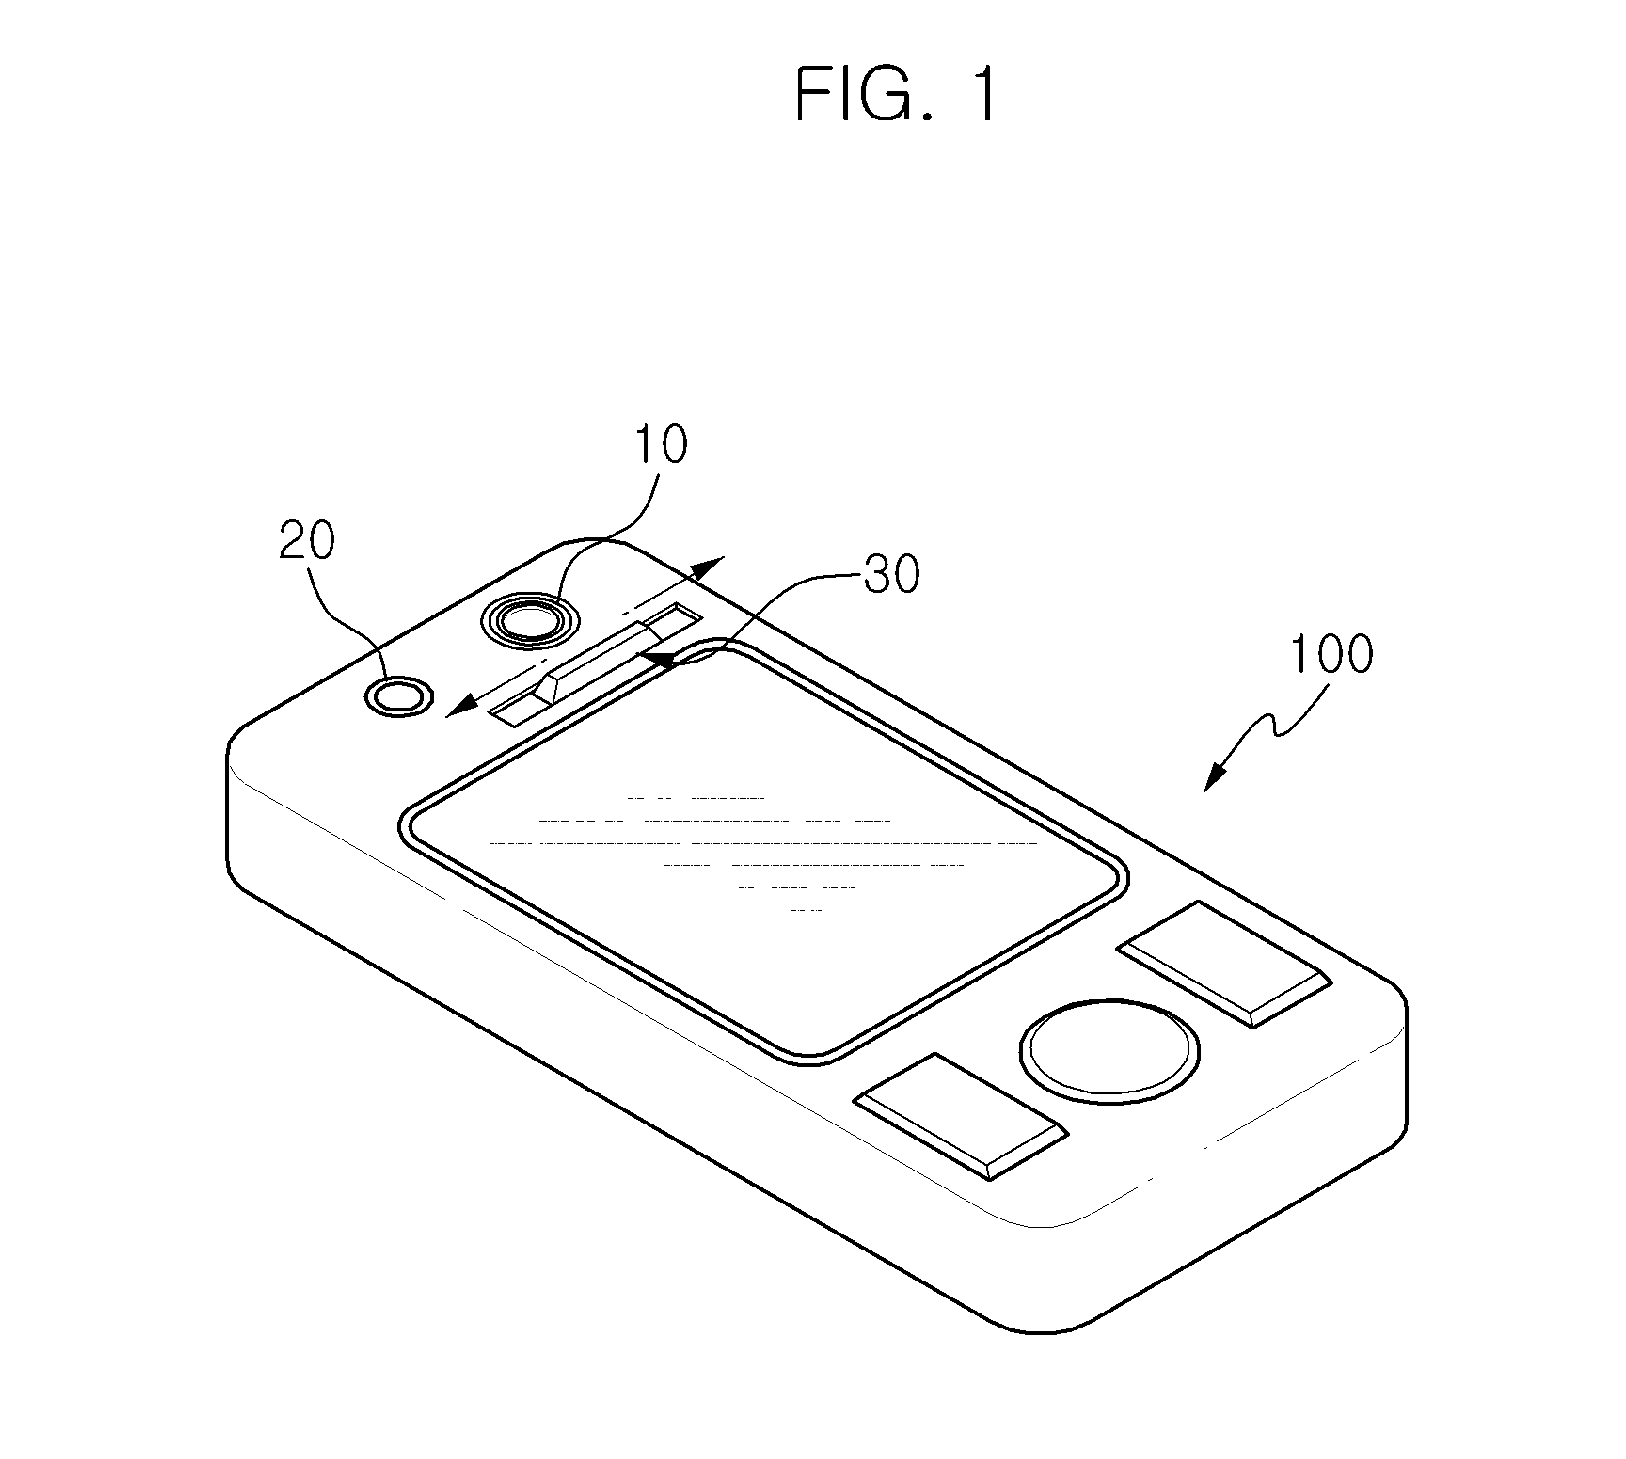 Mobile terminal having gesture recognition function and interface system using the same